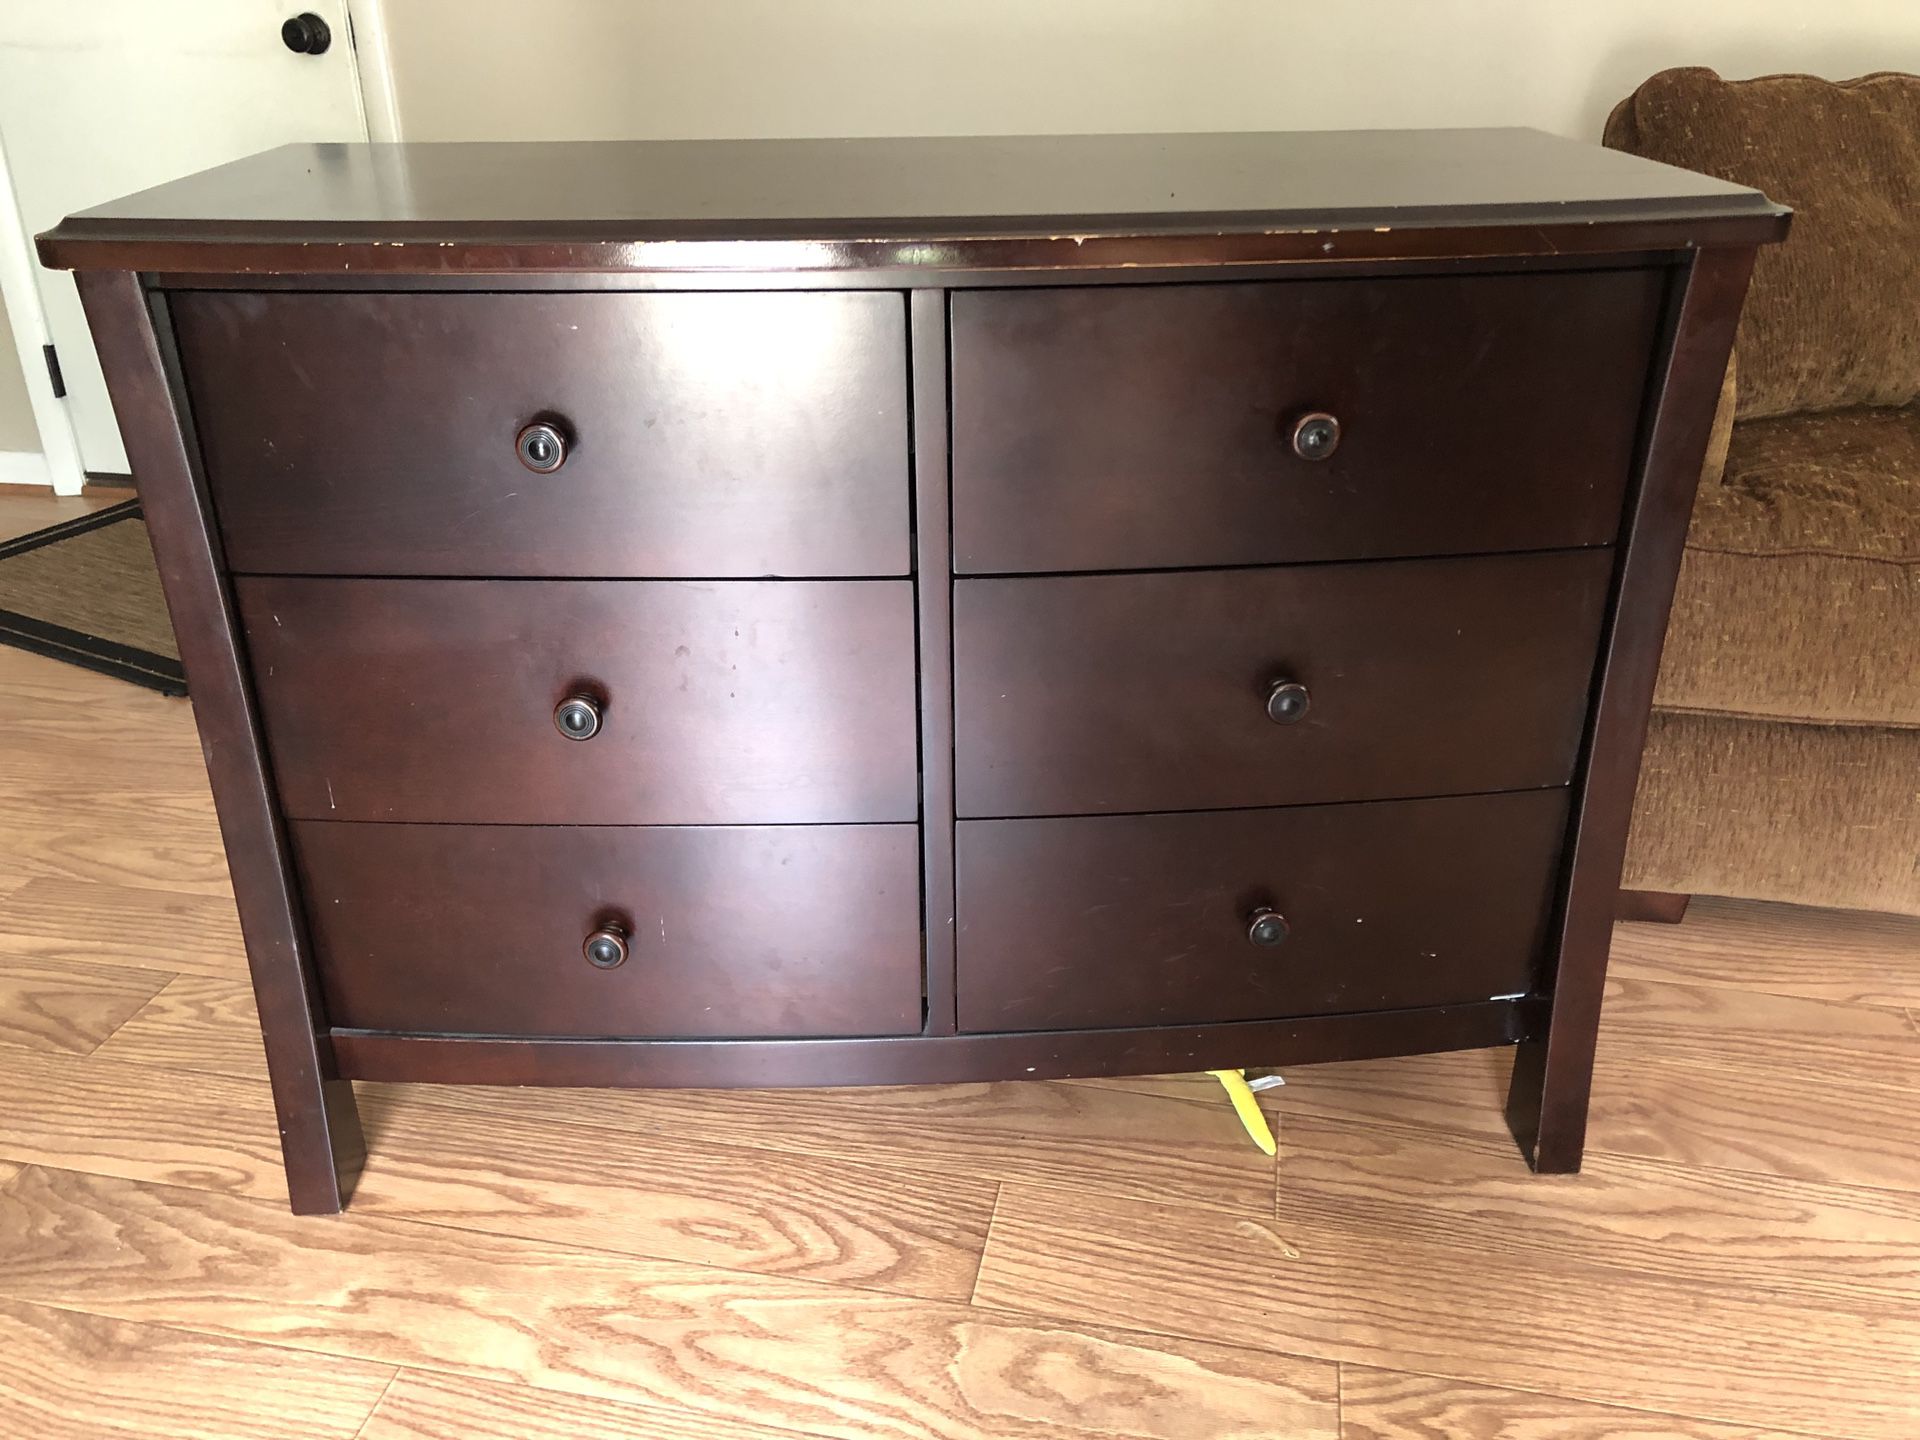 Simmons child’s bedroom set. Convertible bed/crib with matching dresser.